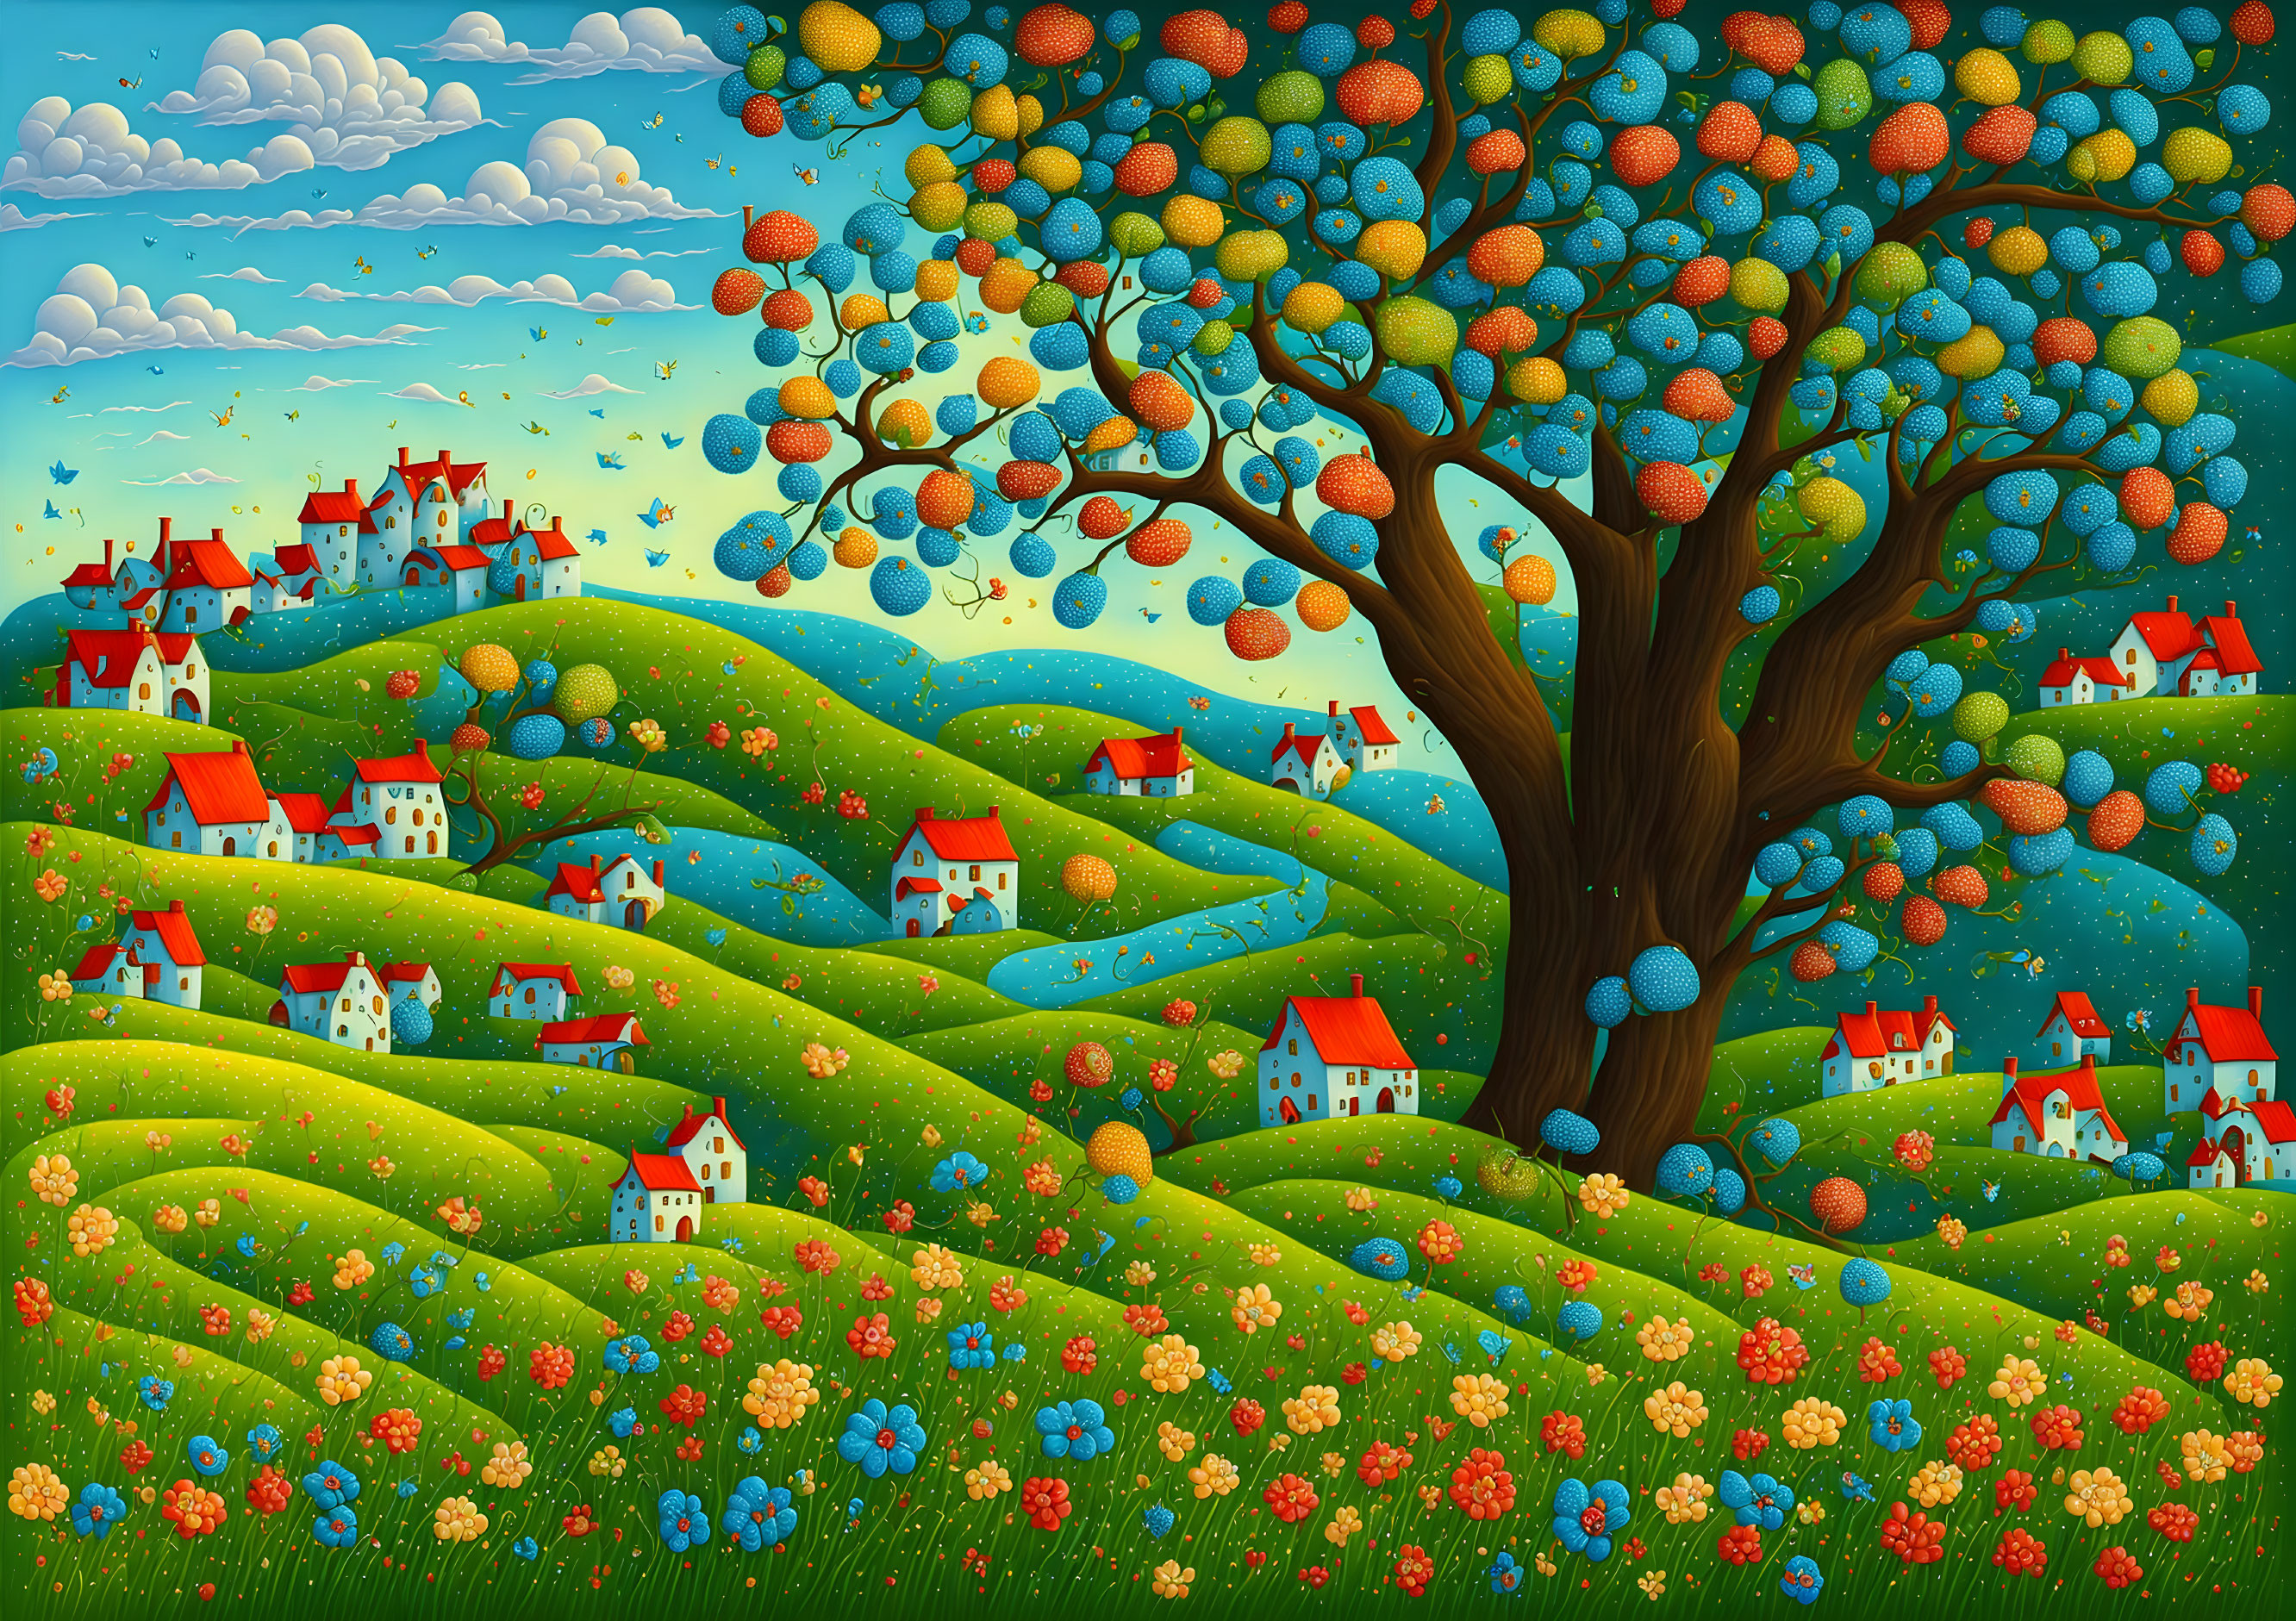 Colorful landscape with green hills, vibrant tree, cottages, river, and birds in blue sky